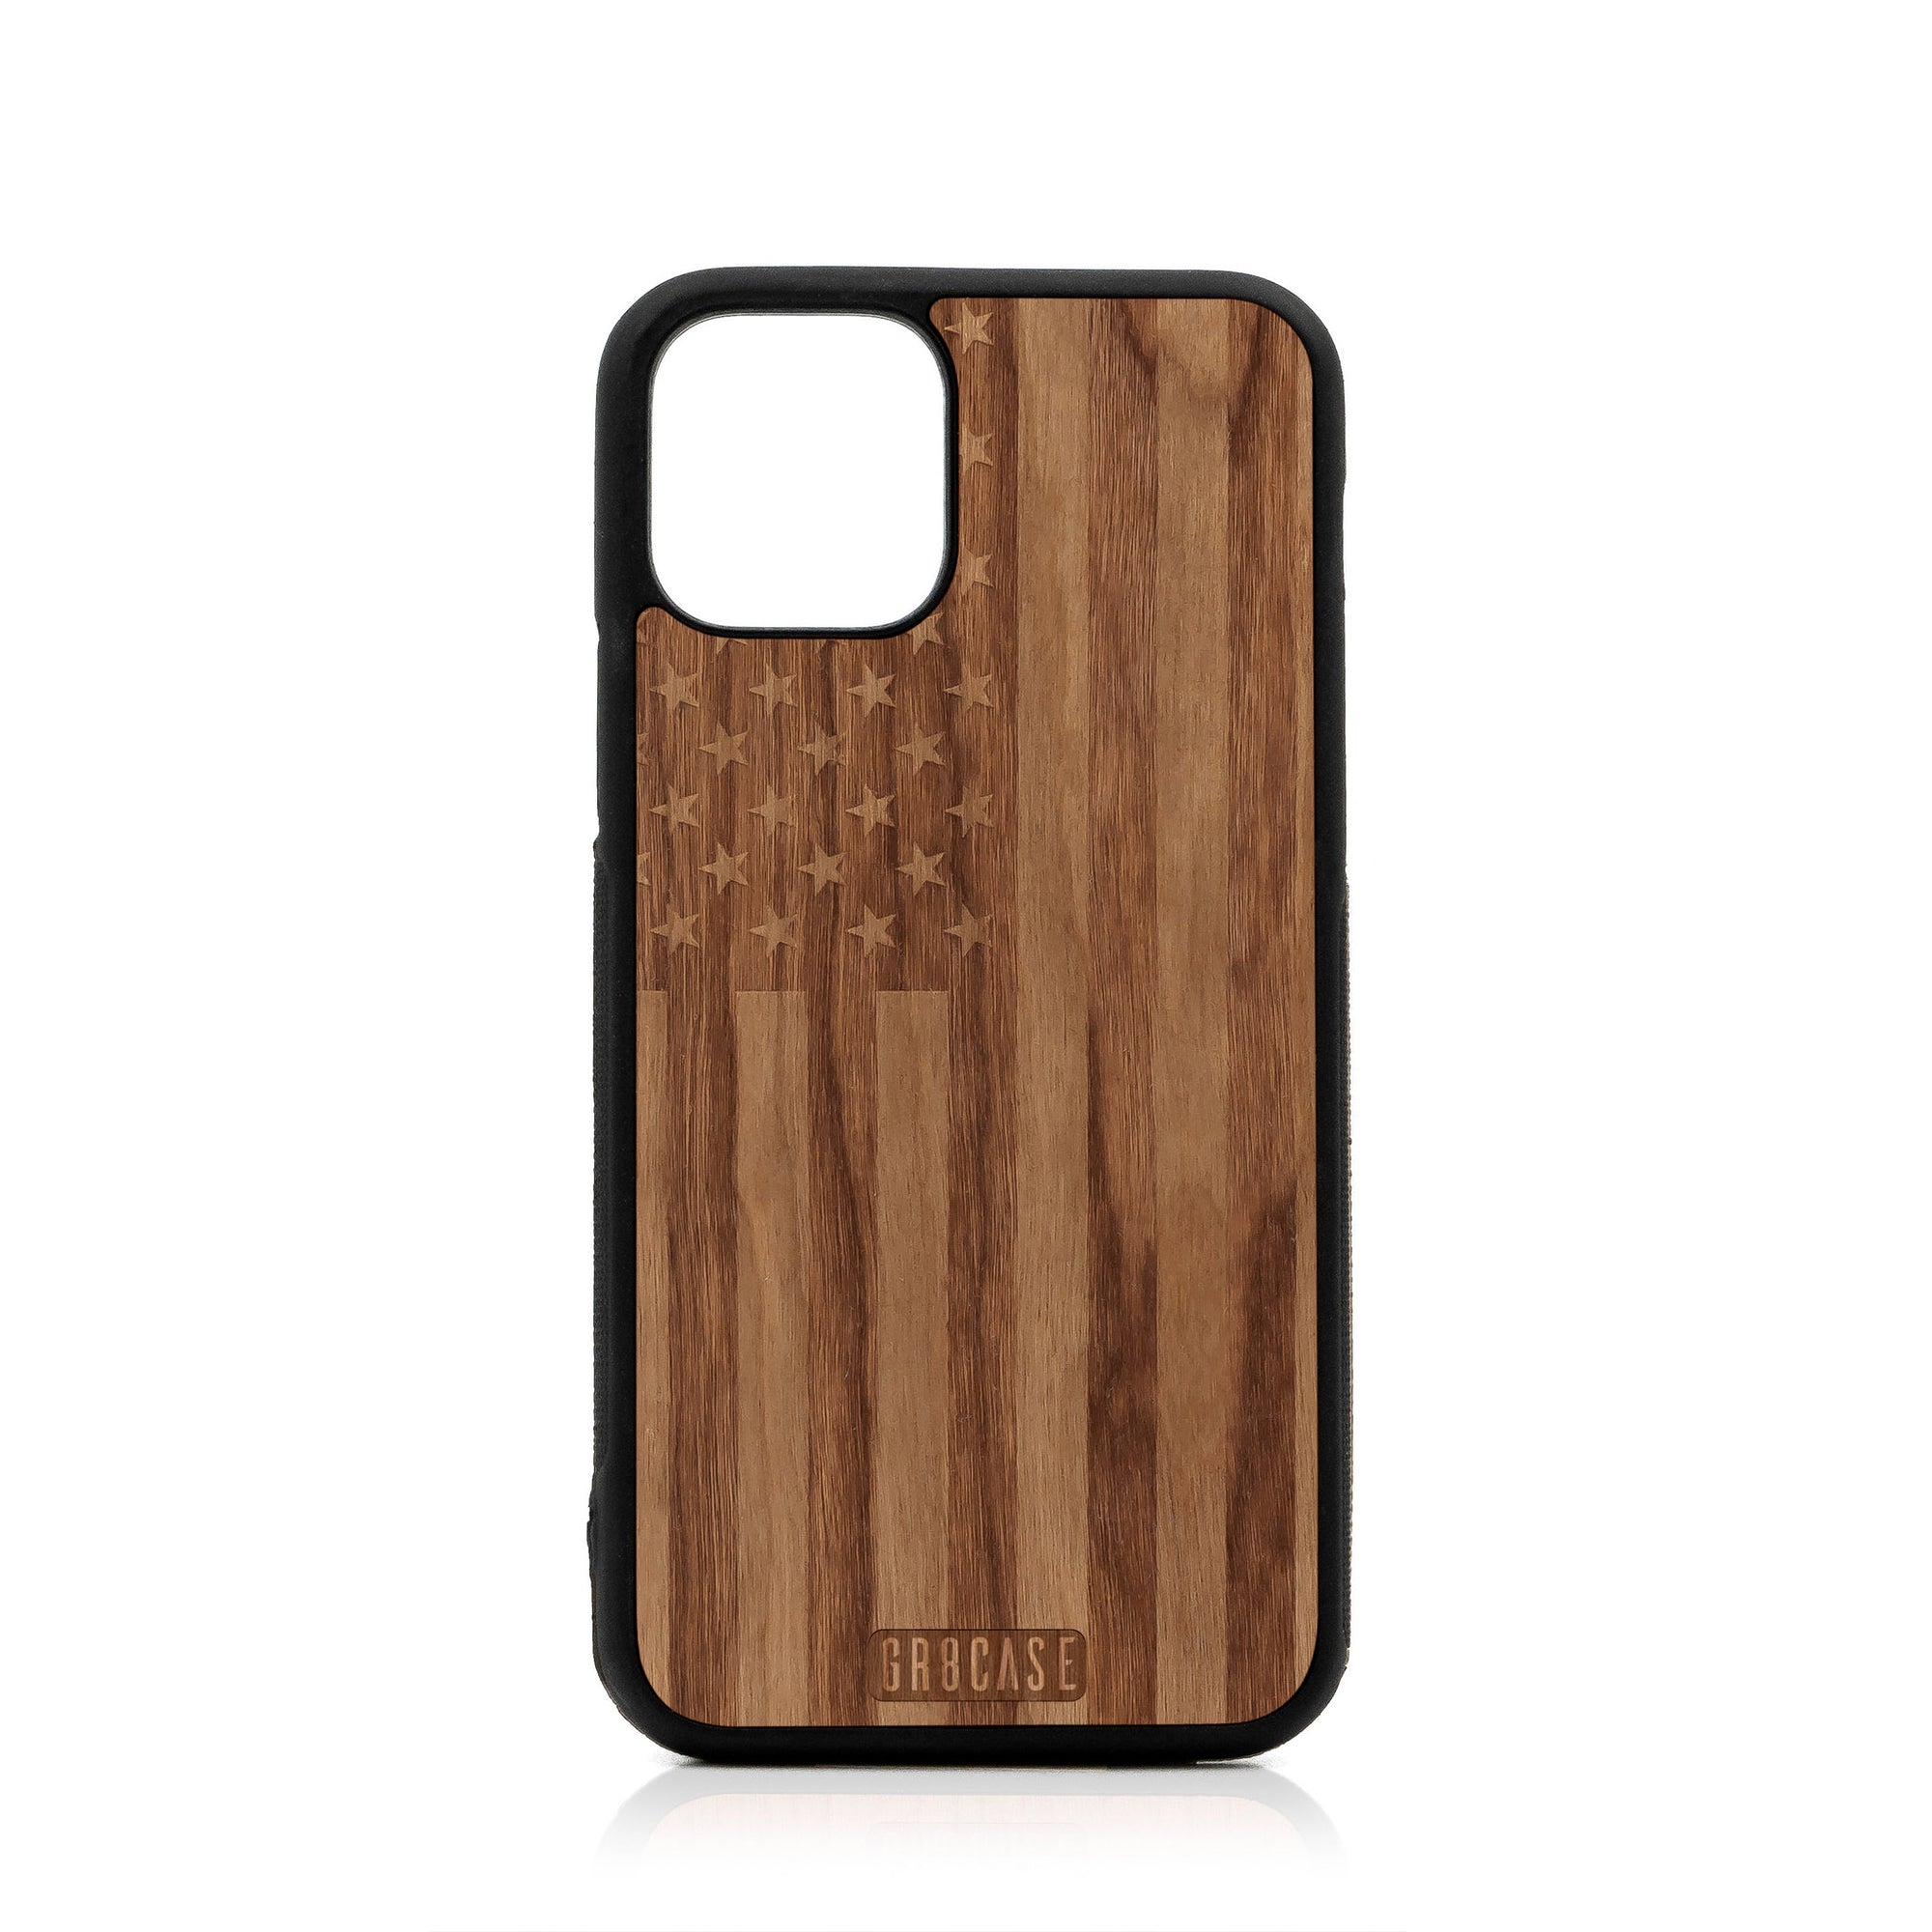 USA Flag Design Wood Case For iPhone 11 Pro